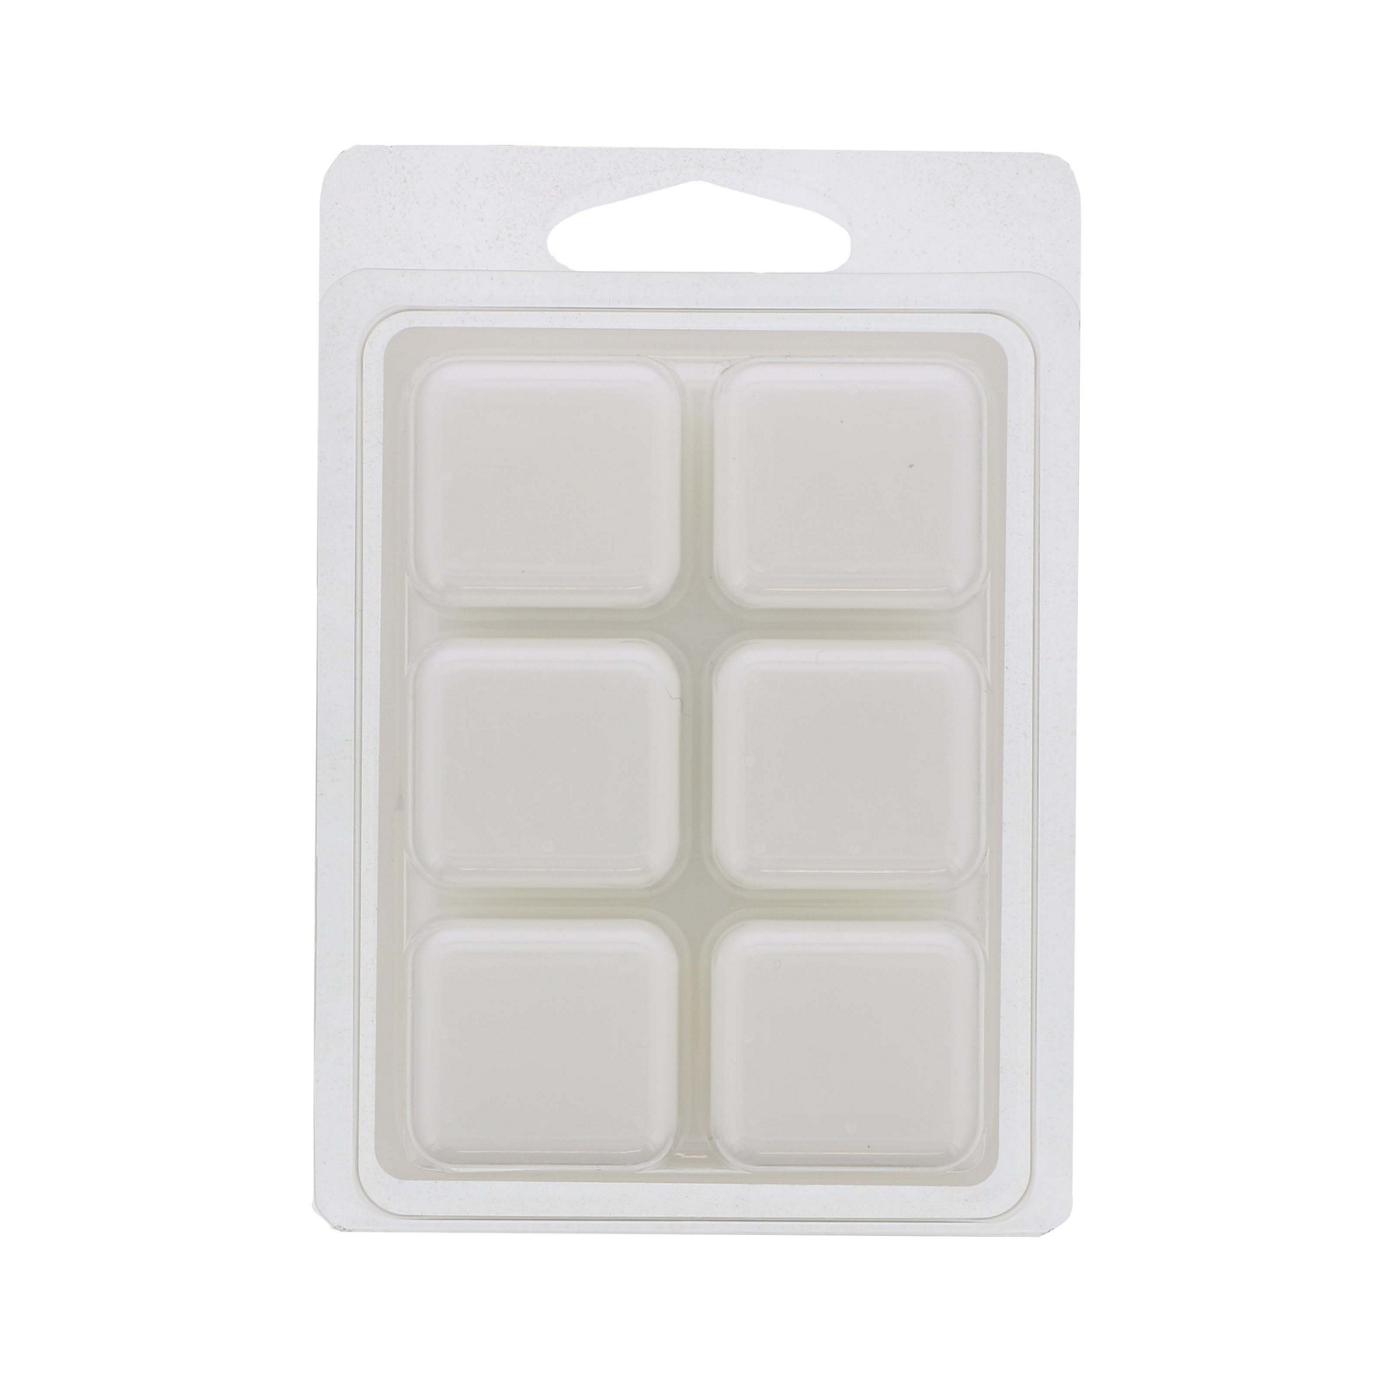 ScentSationals Relax Lavender & Chamomile Scented Wax Cubes, 6 Ct; image 2 of 2